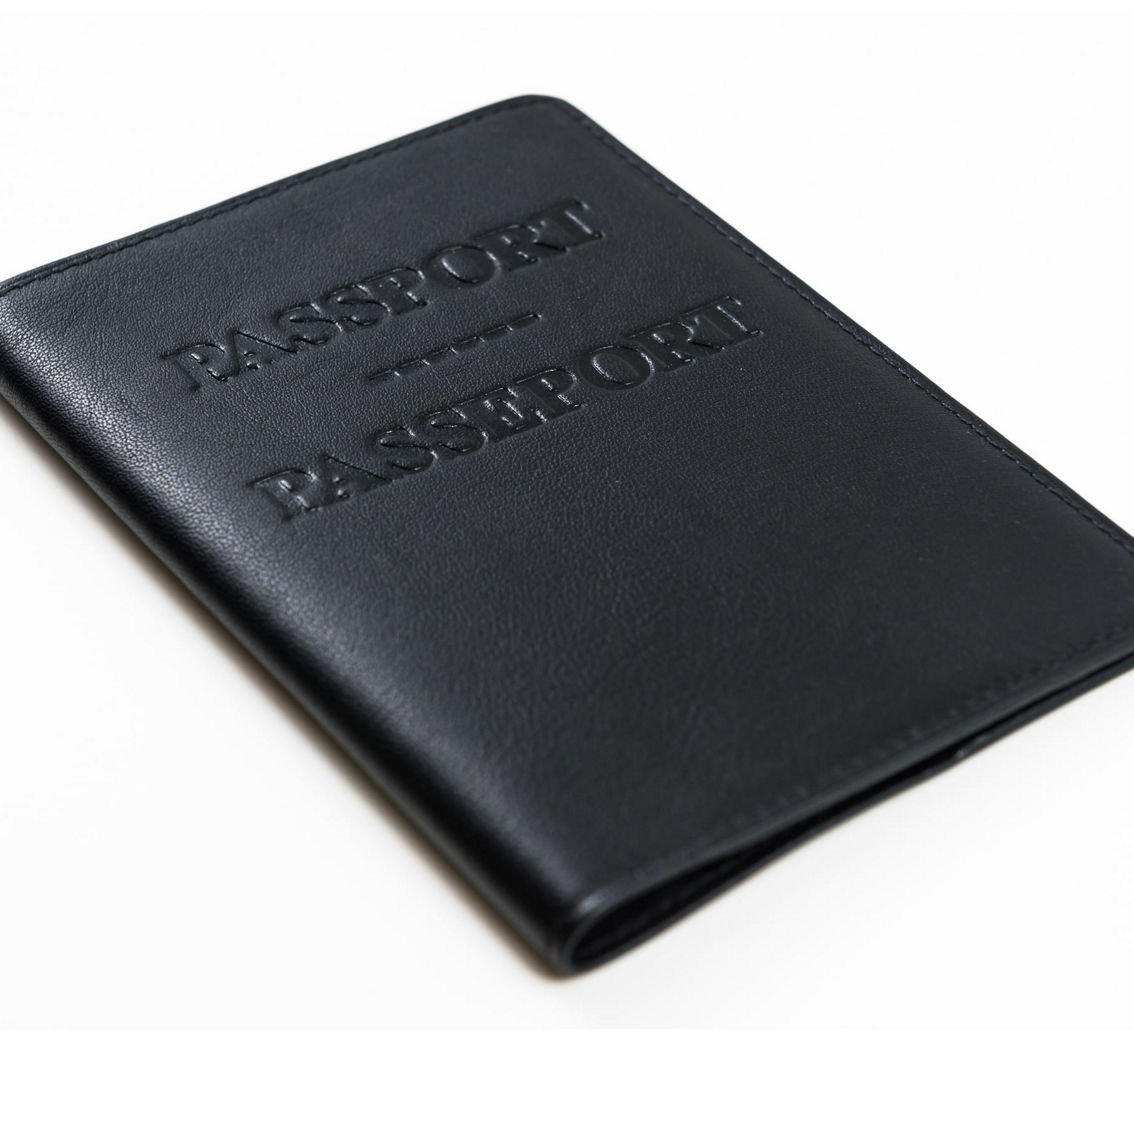 CHAMPS Genuine Leather Passport Holder - Image 2 of 4